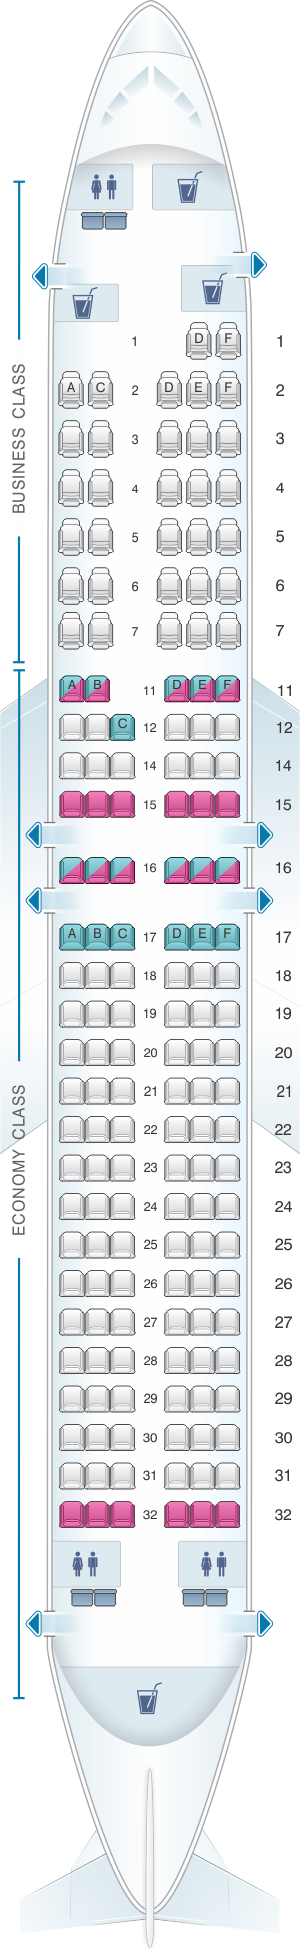 Seat map for South African Airways Boeing B737 800